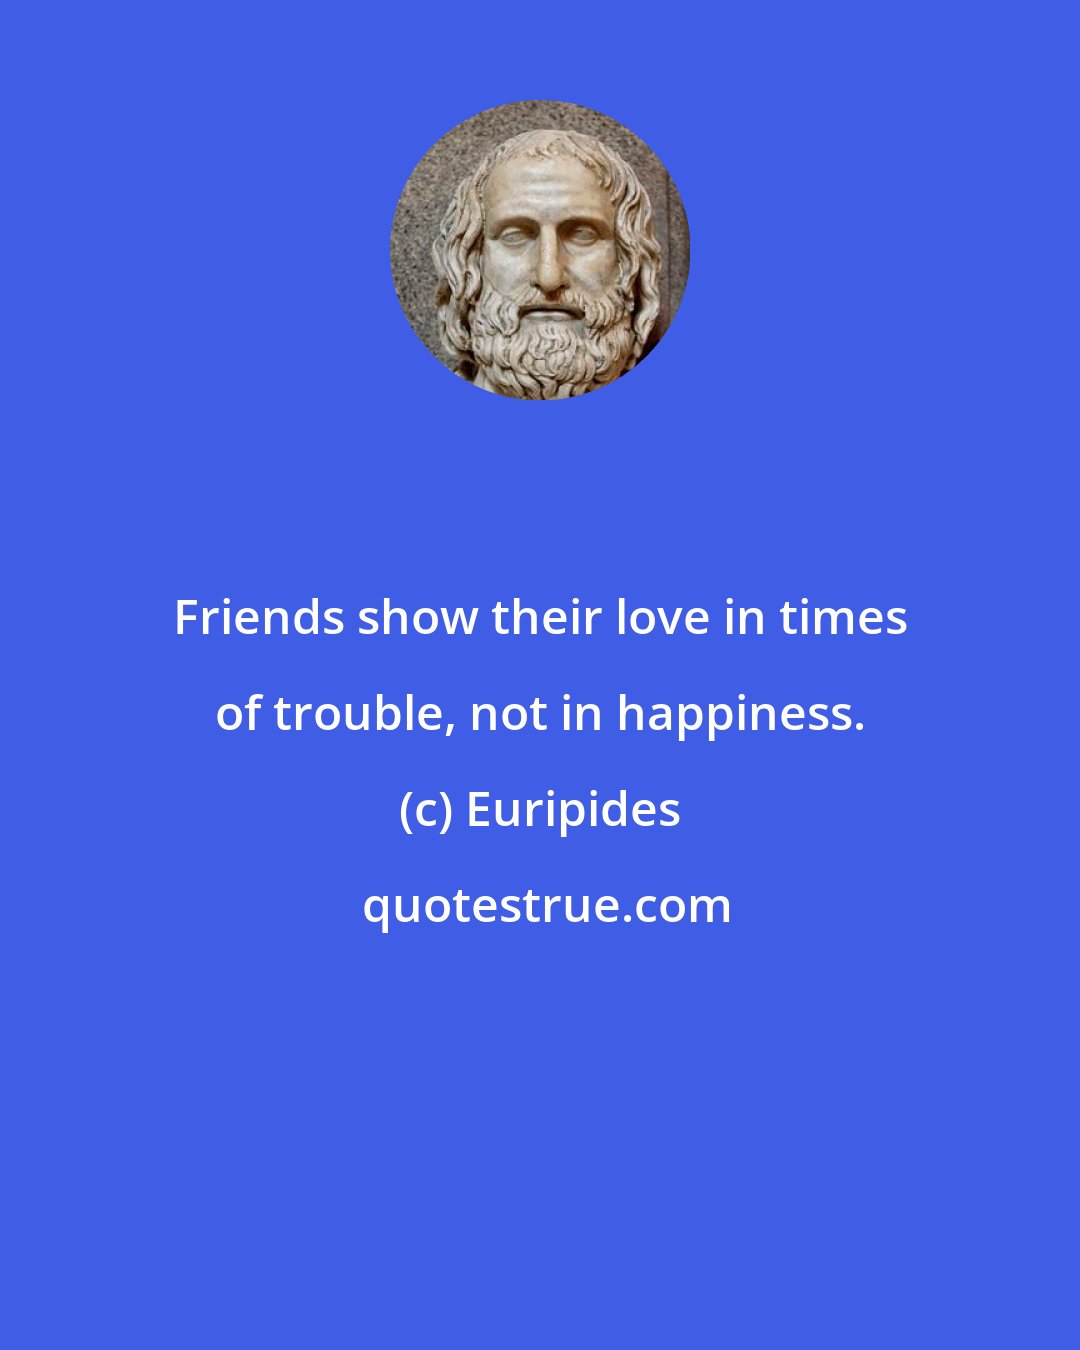 Euripides: Friends show their love in times of trouble, not in happiness.